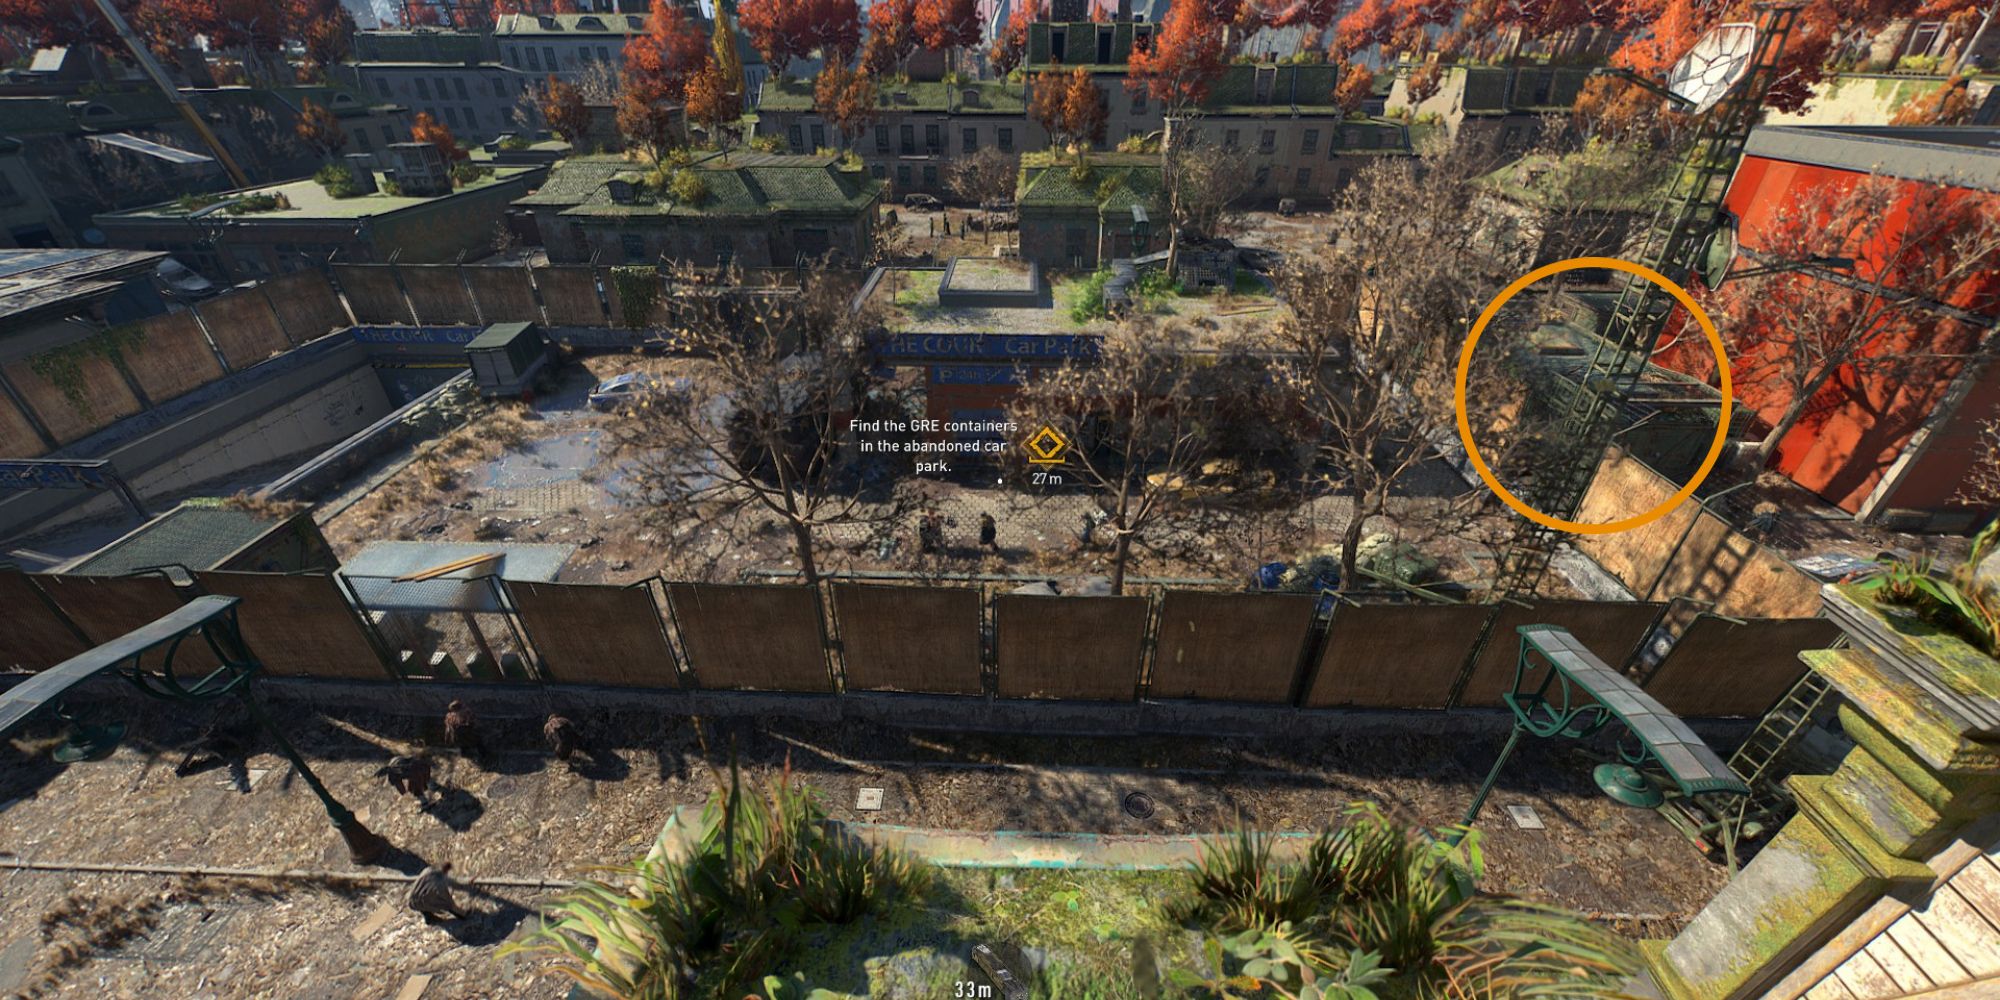 Dying Light 2 car park and inhibitor location